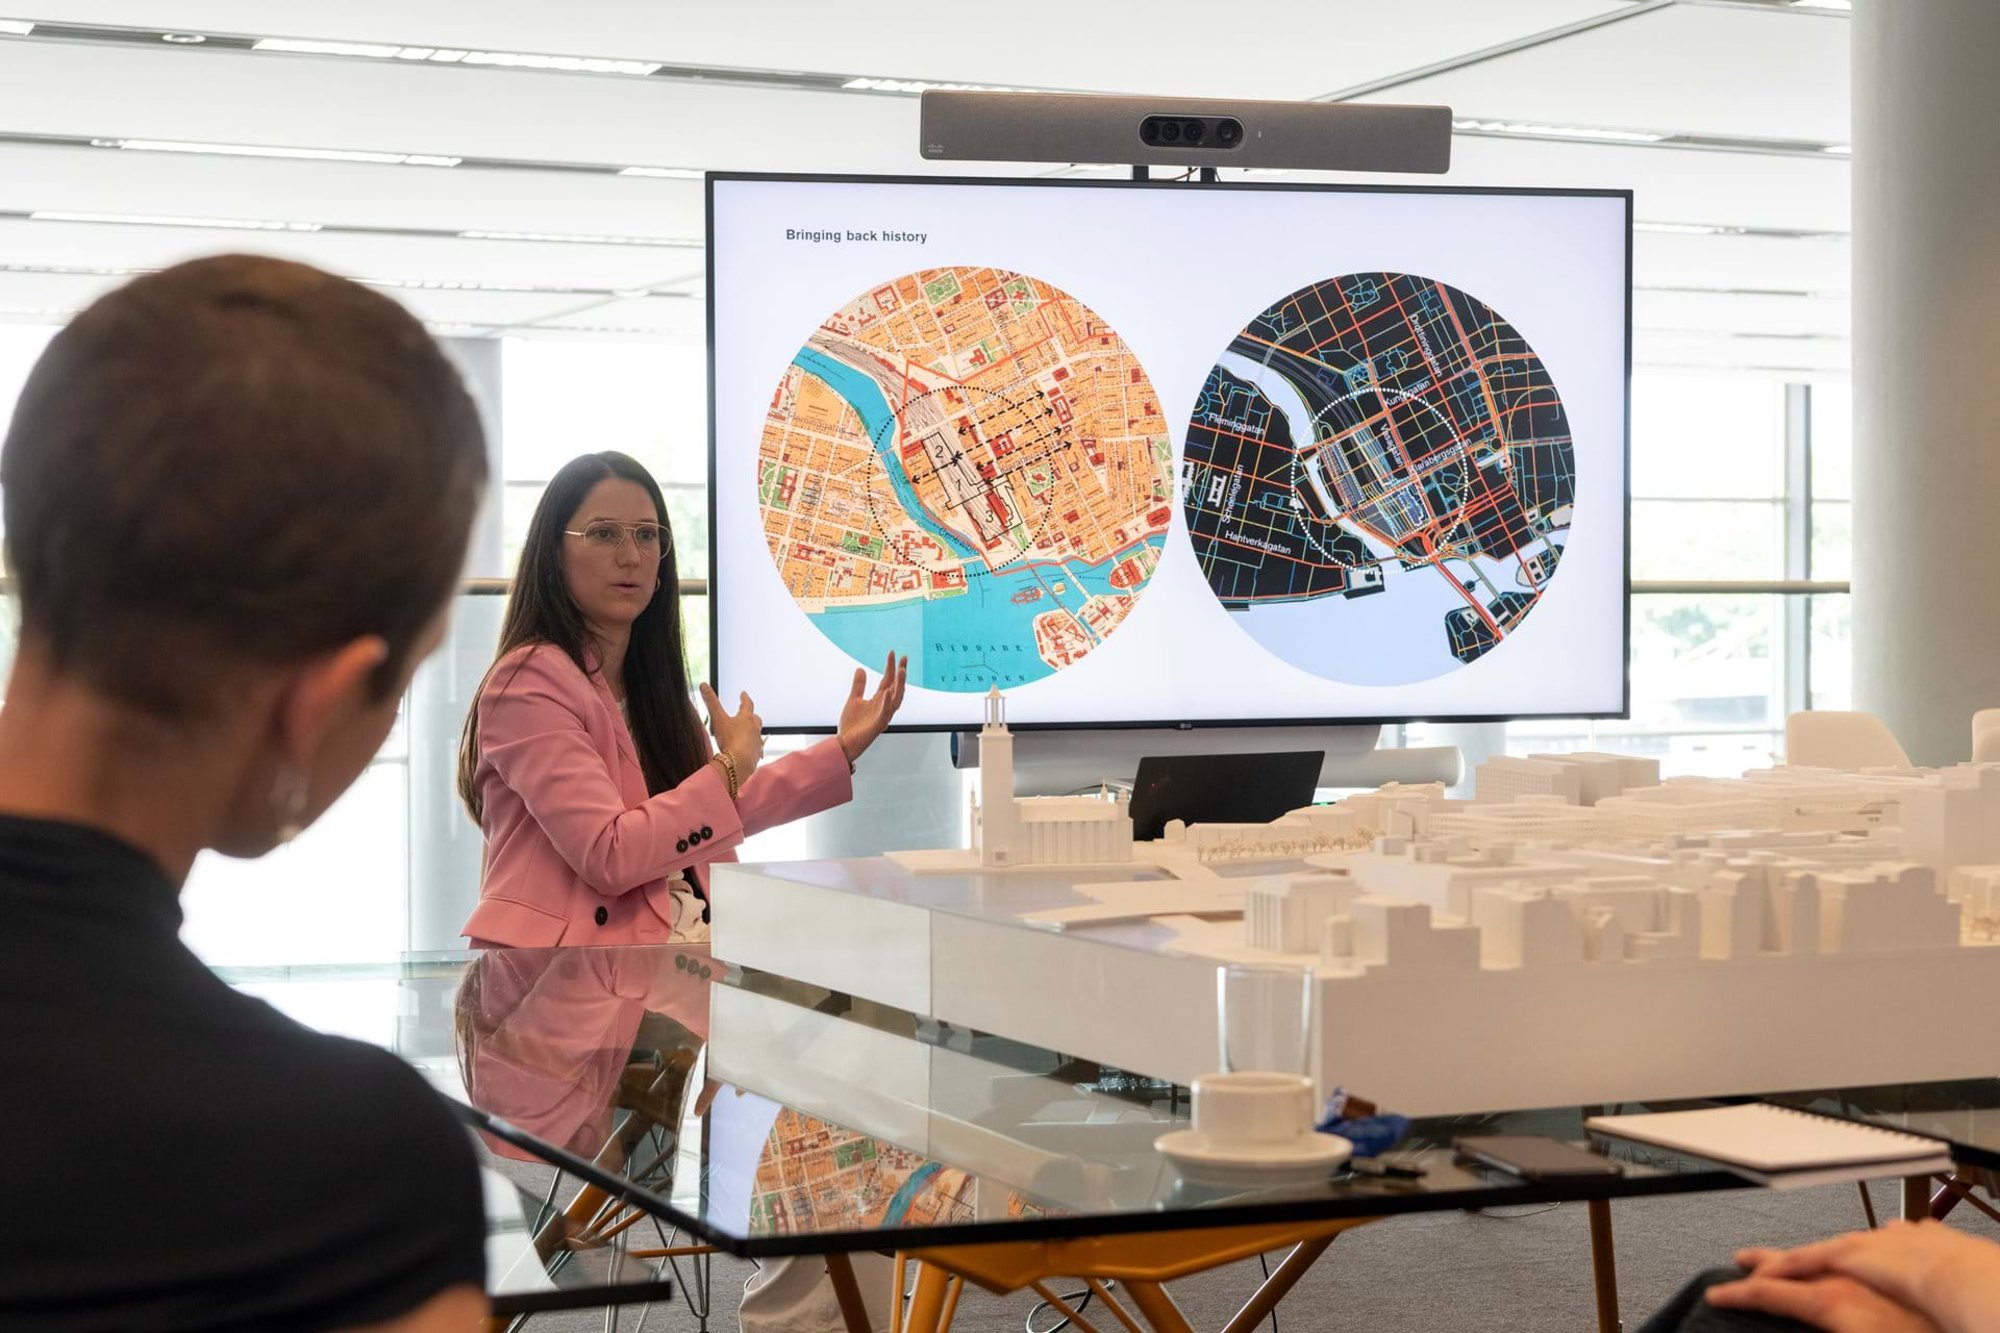 Laura Narvaez Zertuche presents the UDG’s analysis for the competition-winning scheme for the development of Stockholm Central Station at the practice’s London studio. © Nigel Young / Foster + Partners